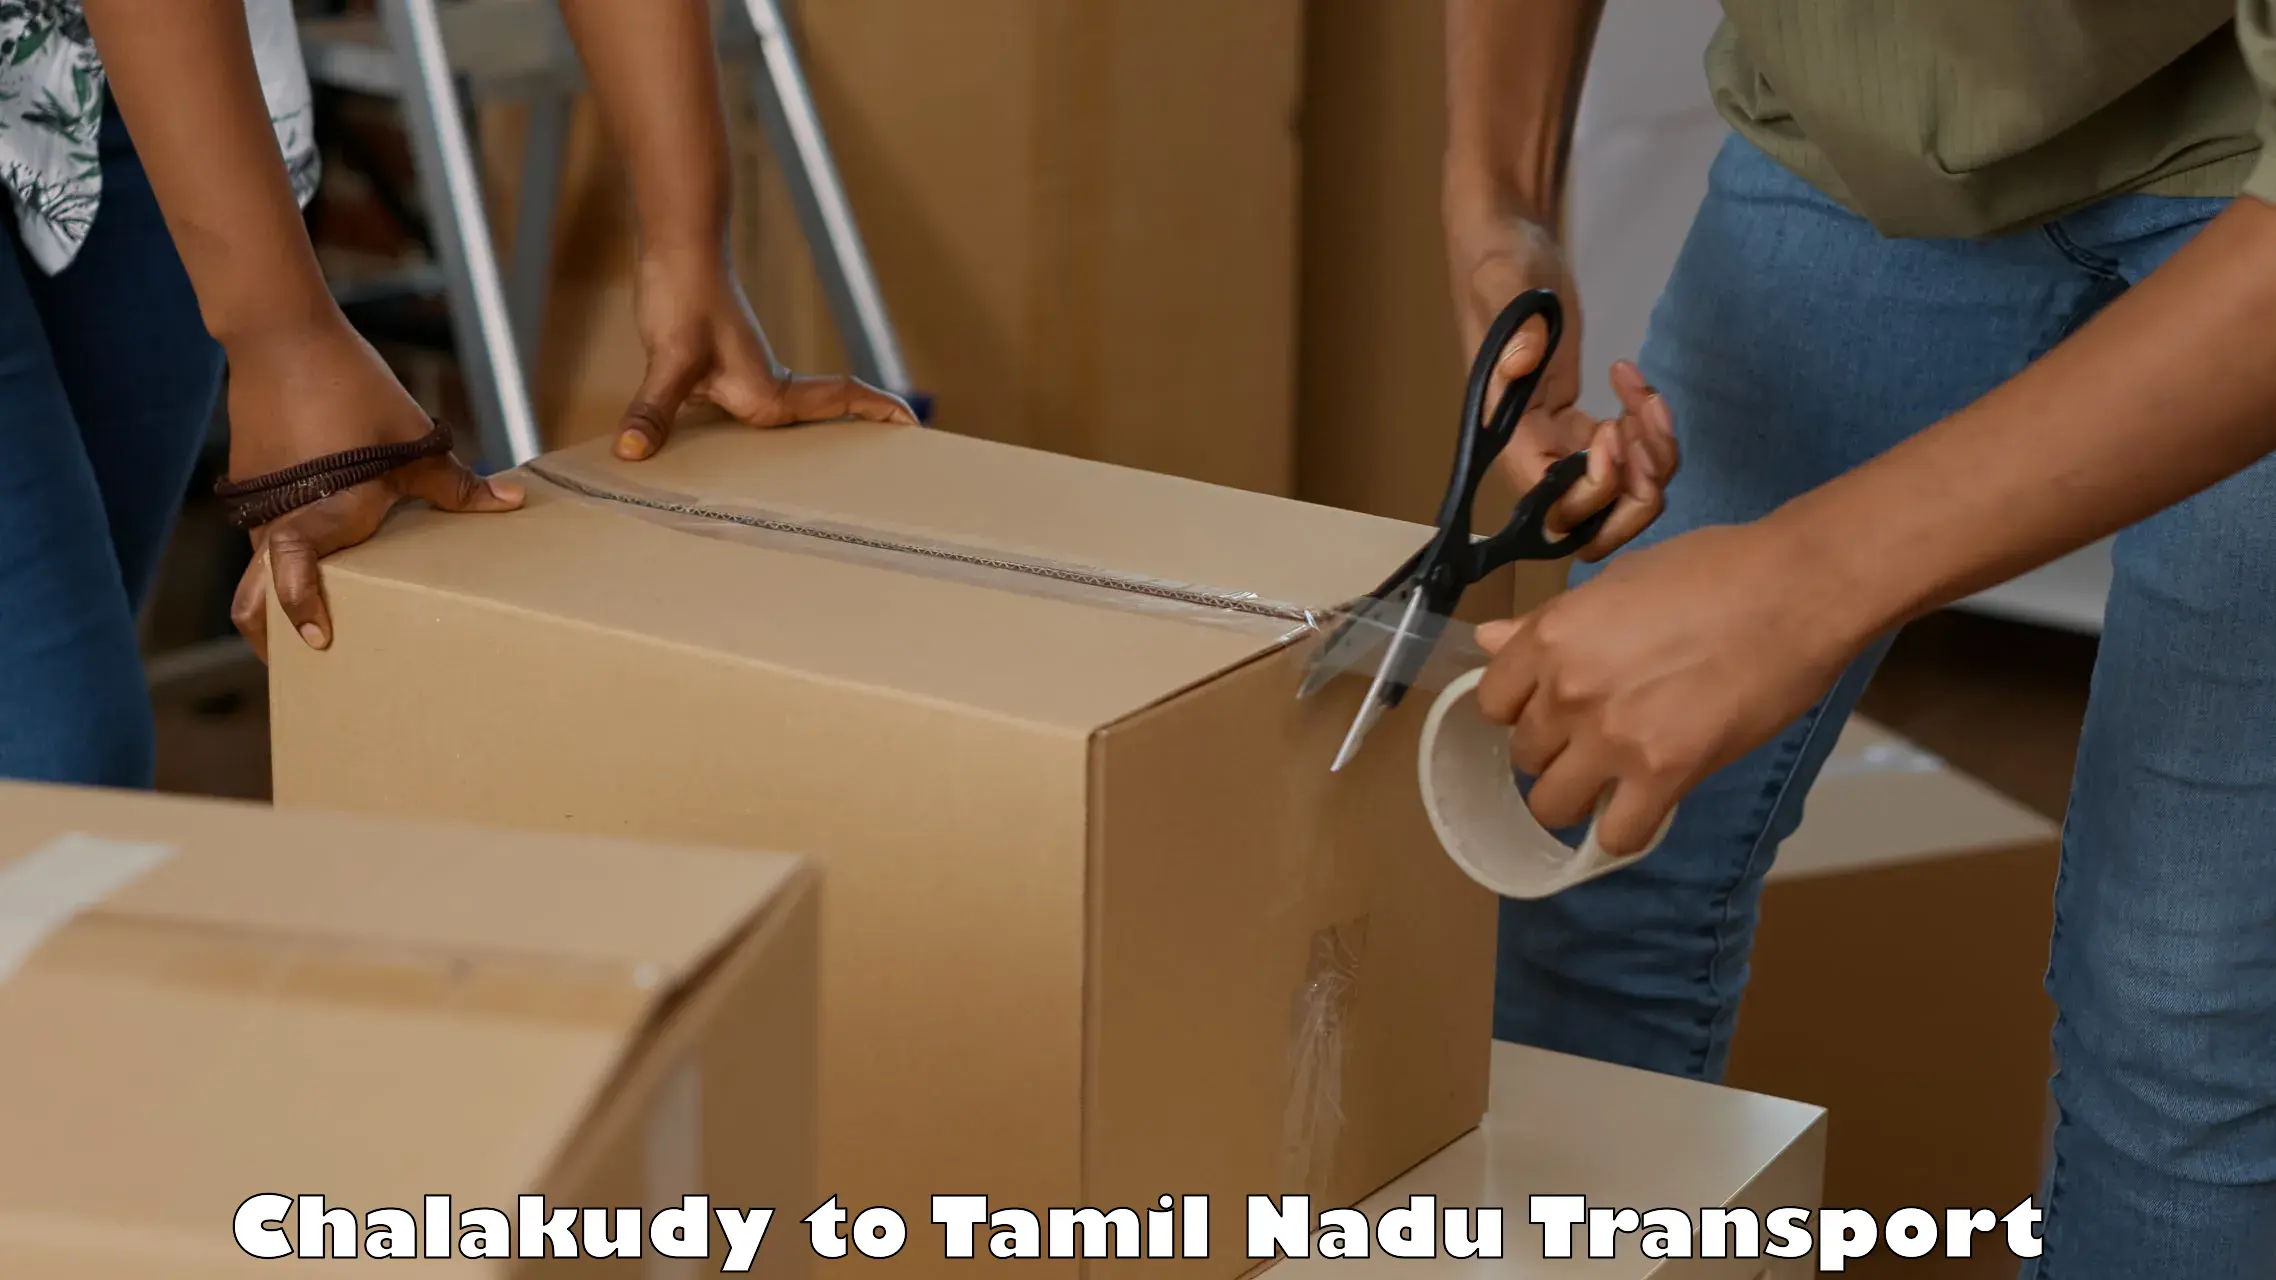 Luggage transport services Chalakudy to Mettur